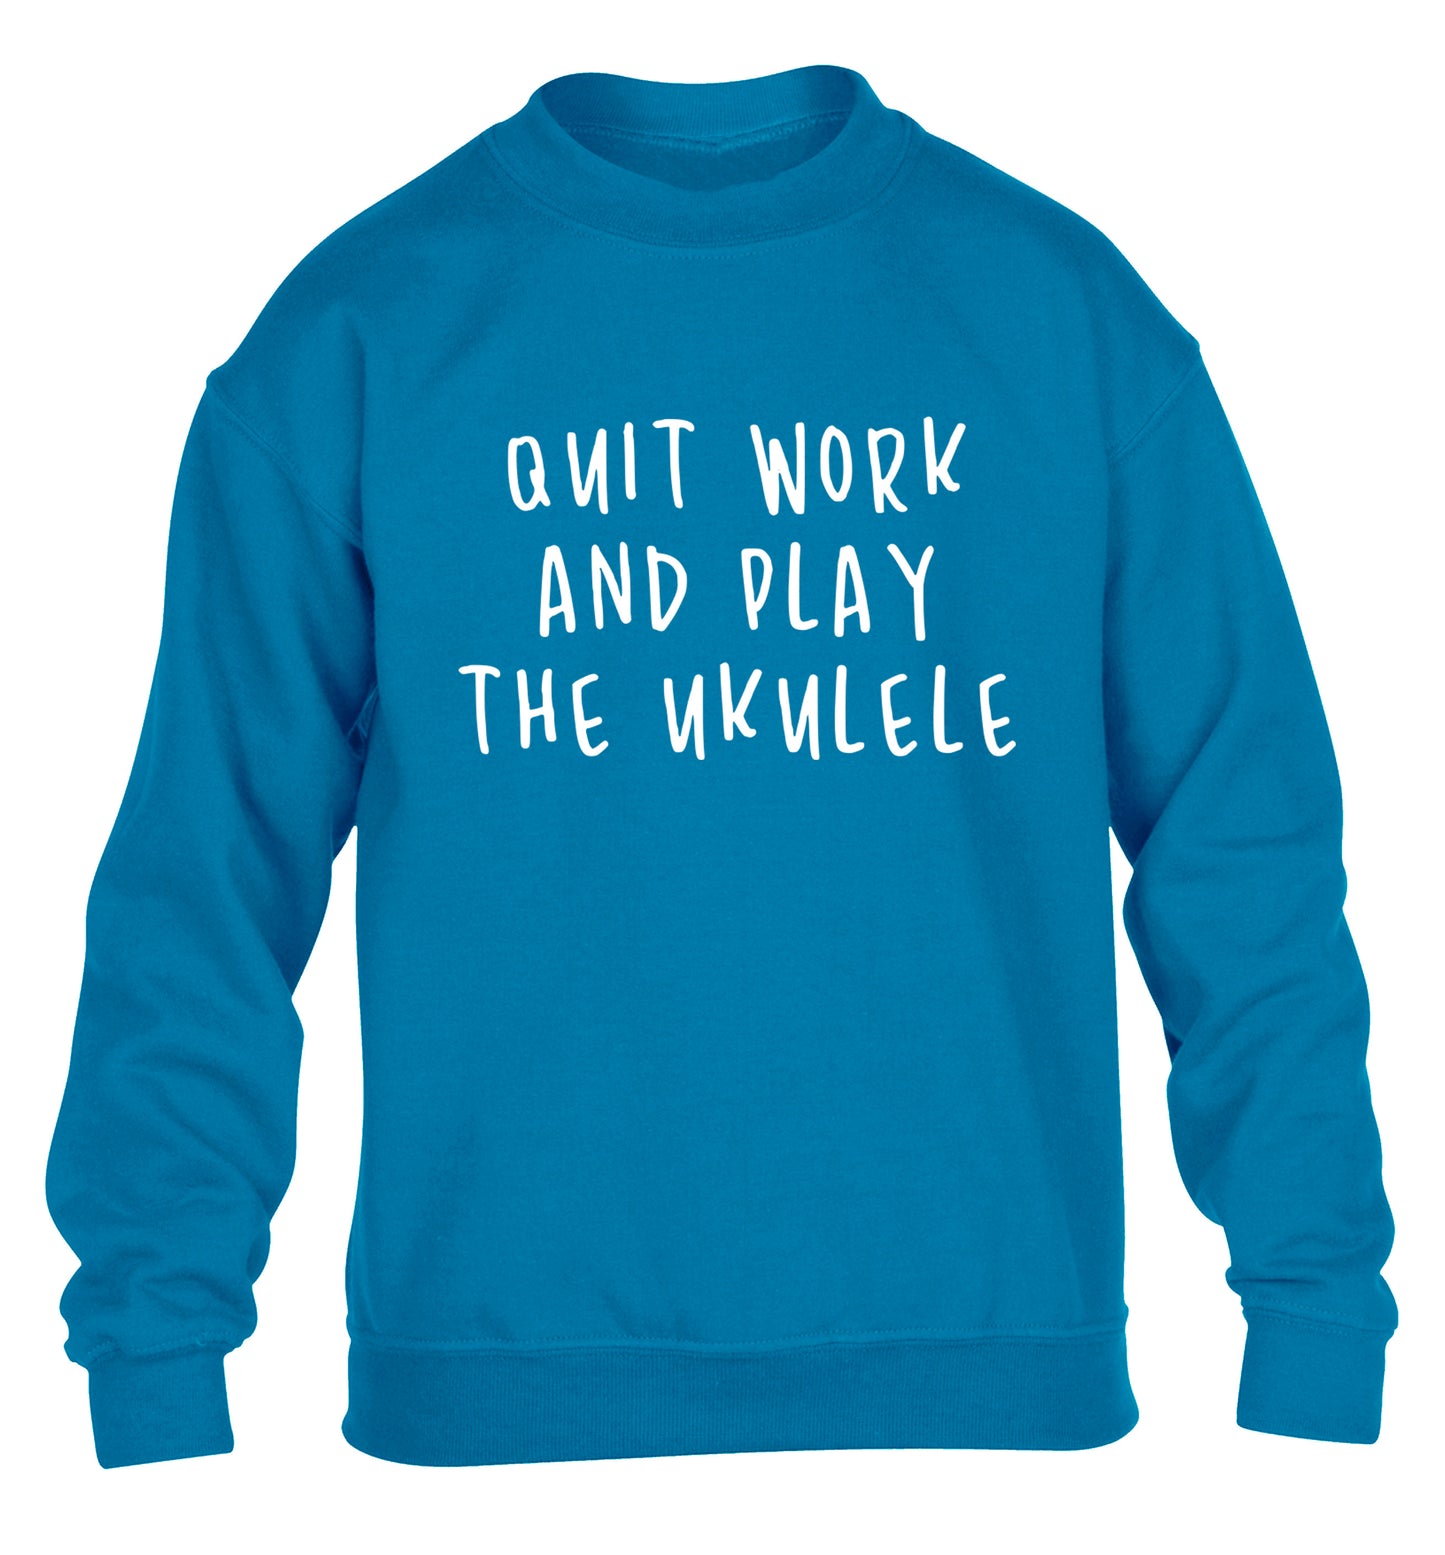 Quit work and play the ukulele children's blue sweater 12-14 Years